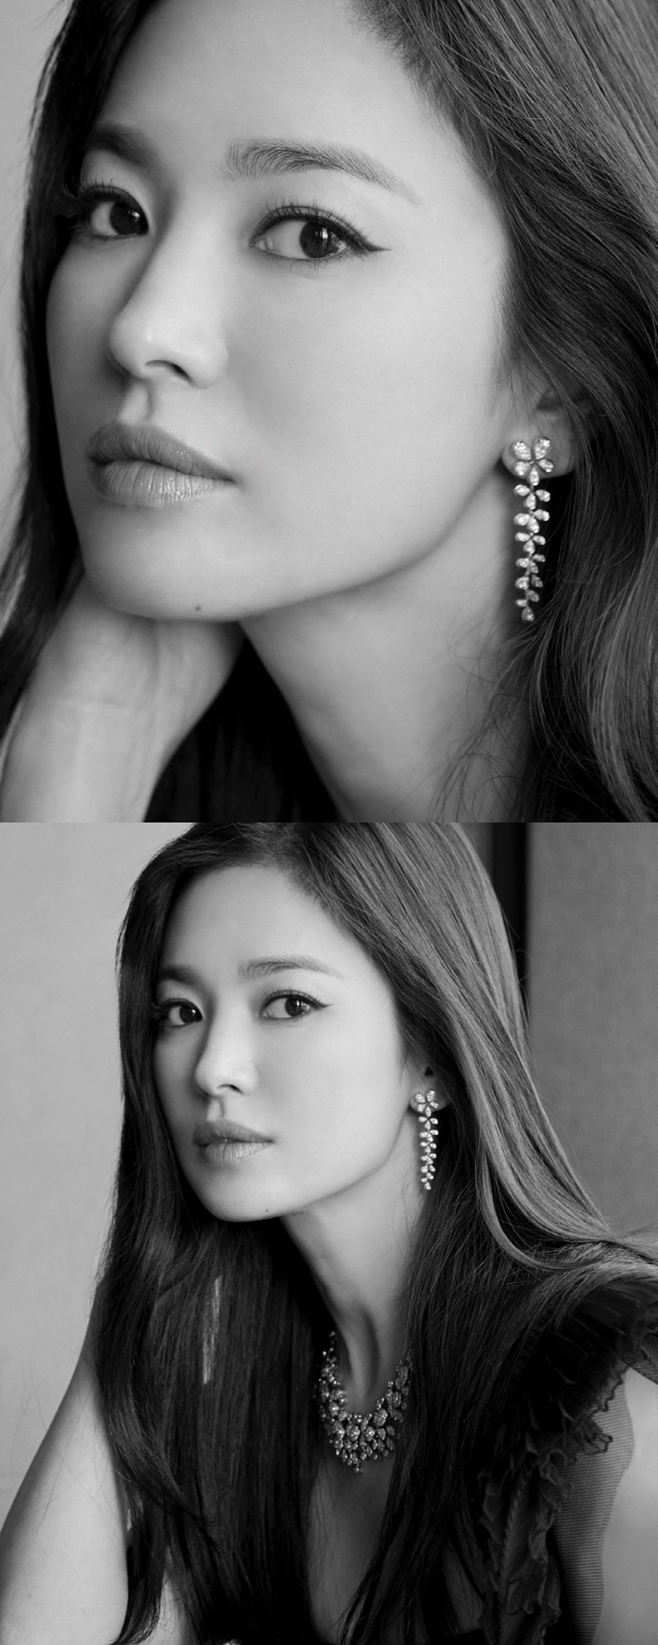 Actor Song Hye-kyo reveals recent statusSong Hye-kyo posted two photos on the personal Instagram on the 24th.In the open photo, Song Hye-kyo is looking at the camera wearing colorful accessories. Song Hye-kyo captivated his eyes with distinctive features and sleek jawline.Song Hye-kyo is reportedly considering the movie Anna as his next film.